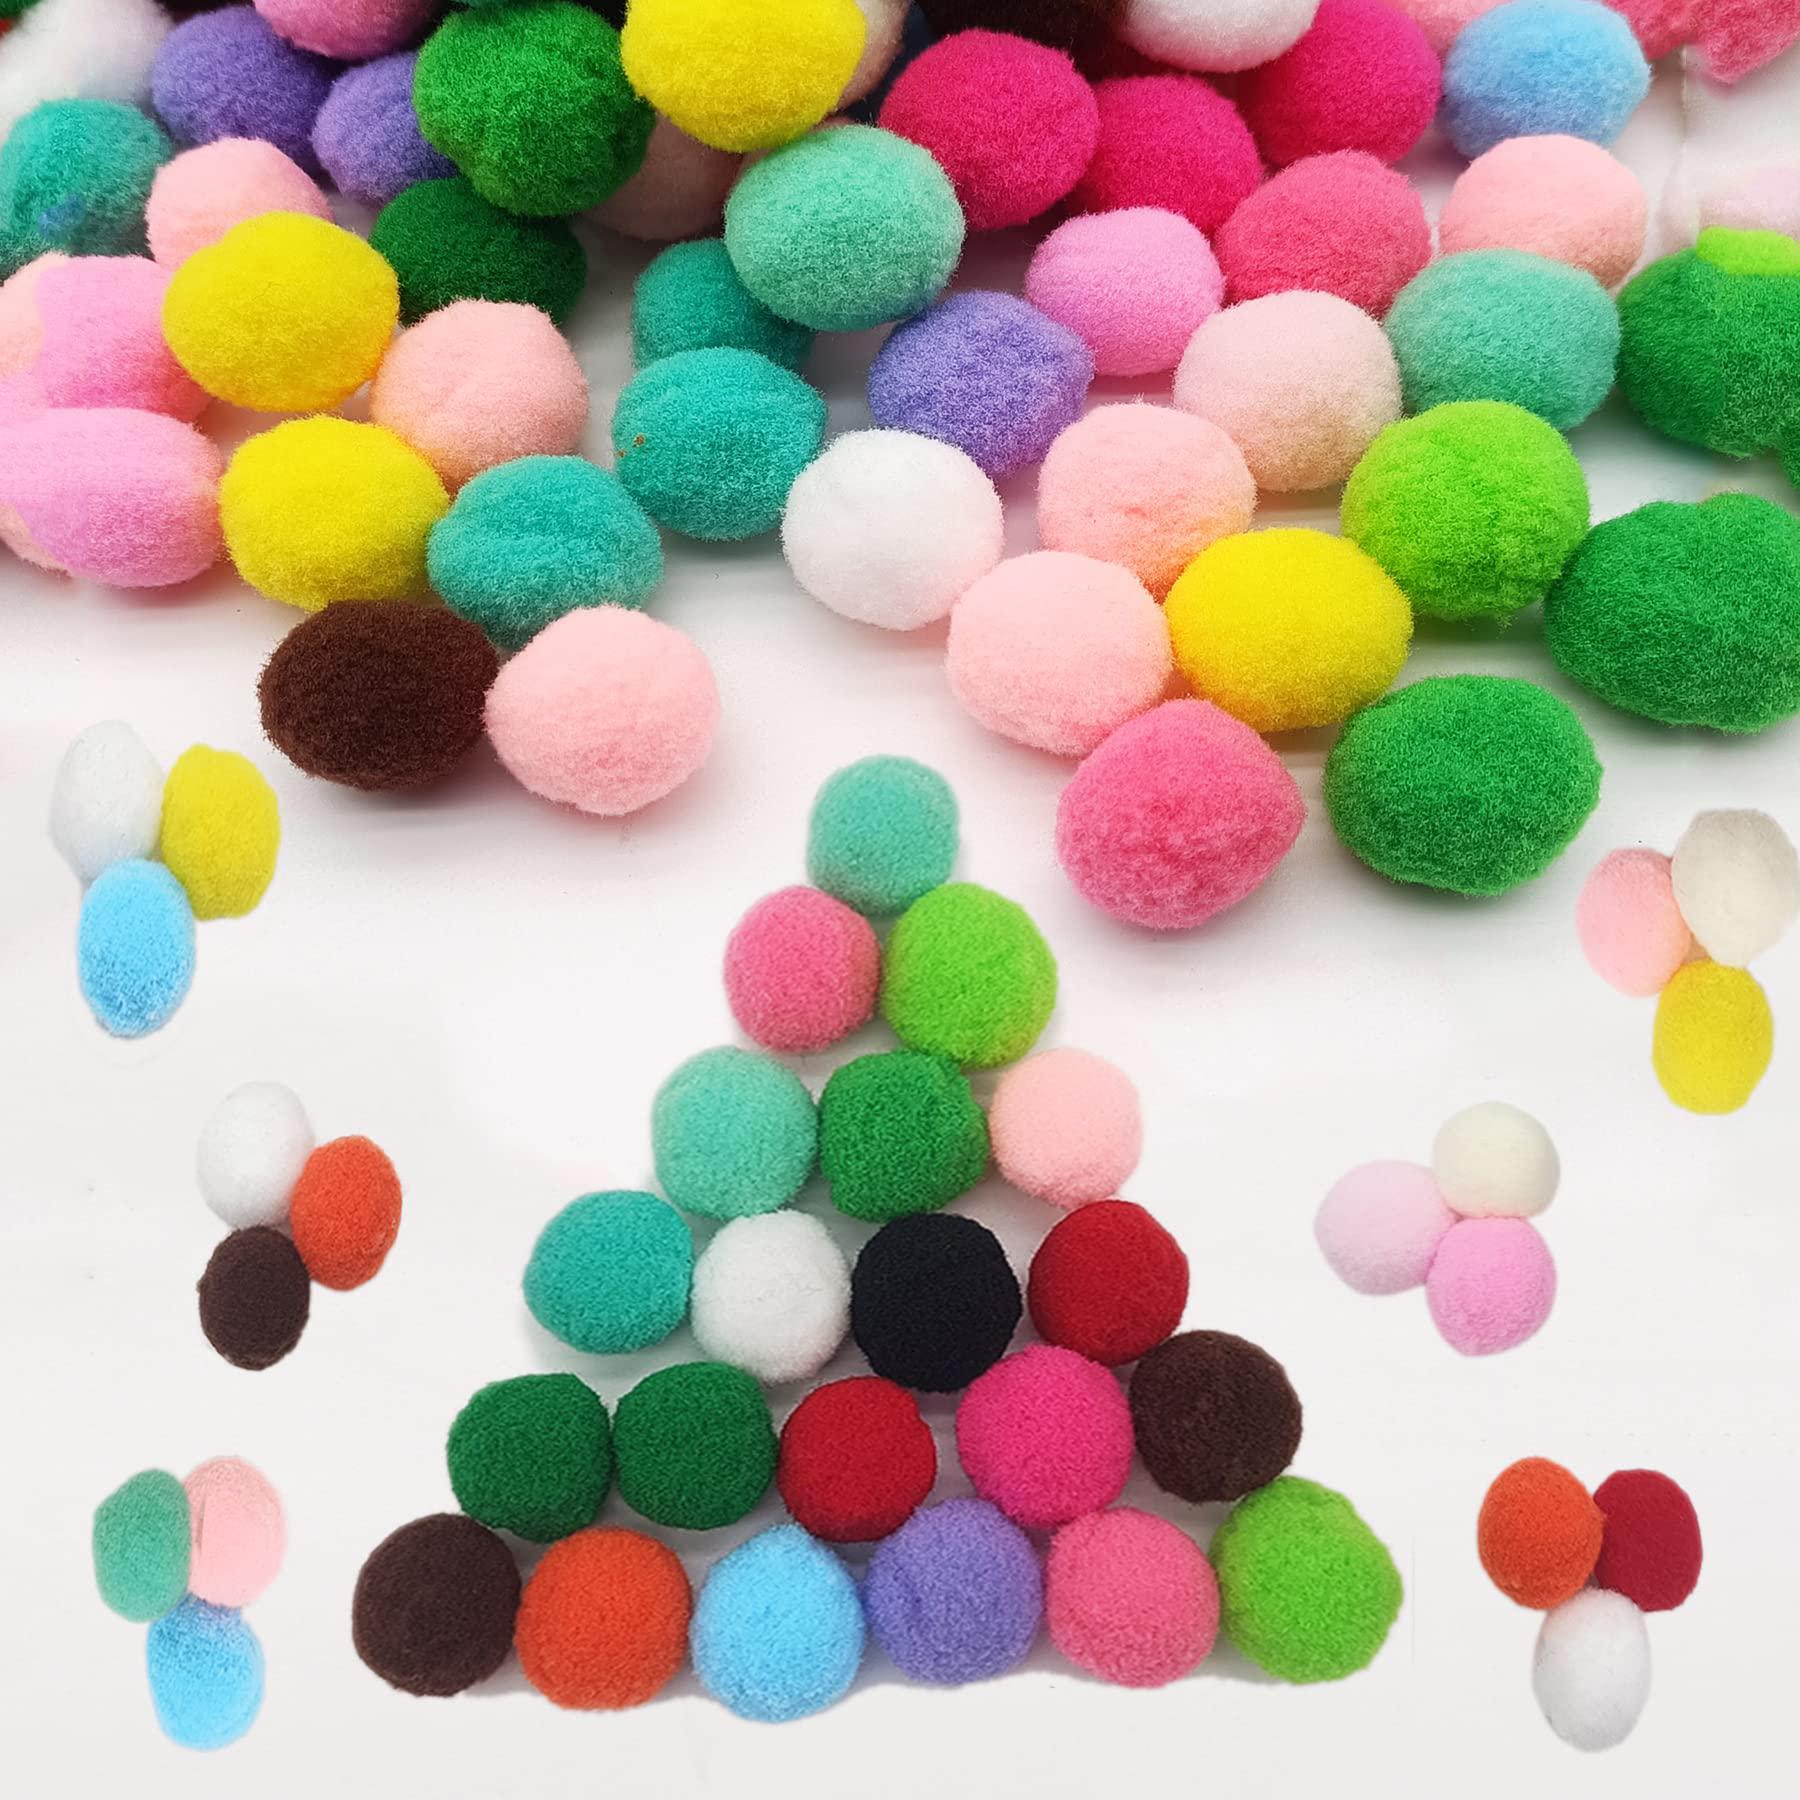 Chwang 320 Pieces 20 Colors Pom Pom Balls,1 inch Multicolor Pompoms for Kids Arts and Craft Projects, Assorted Pom Poms Decor